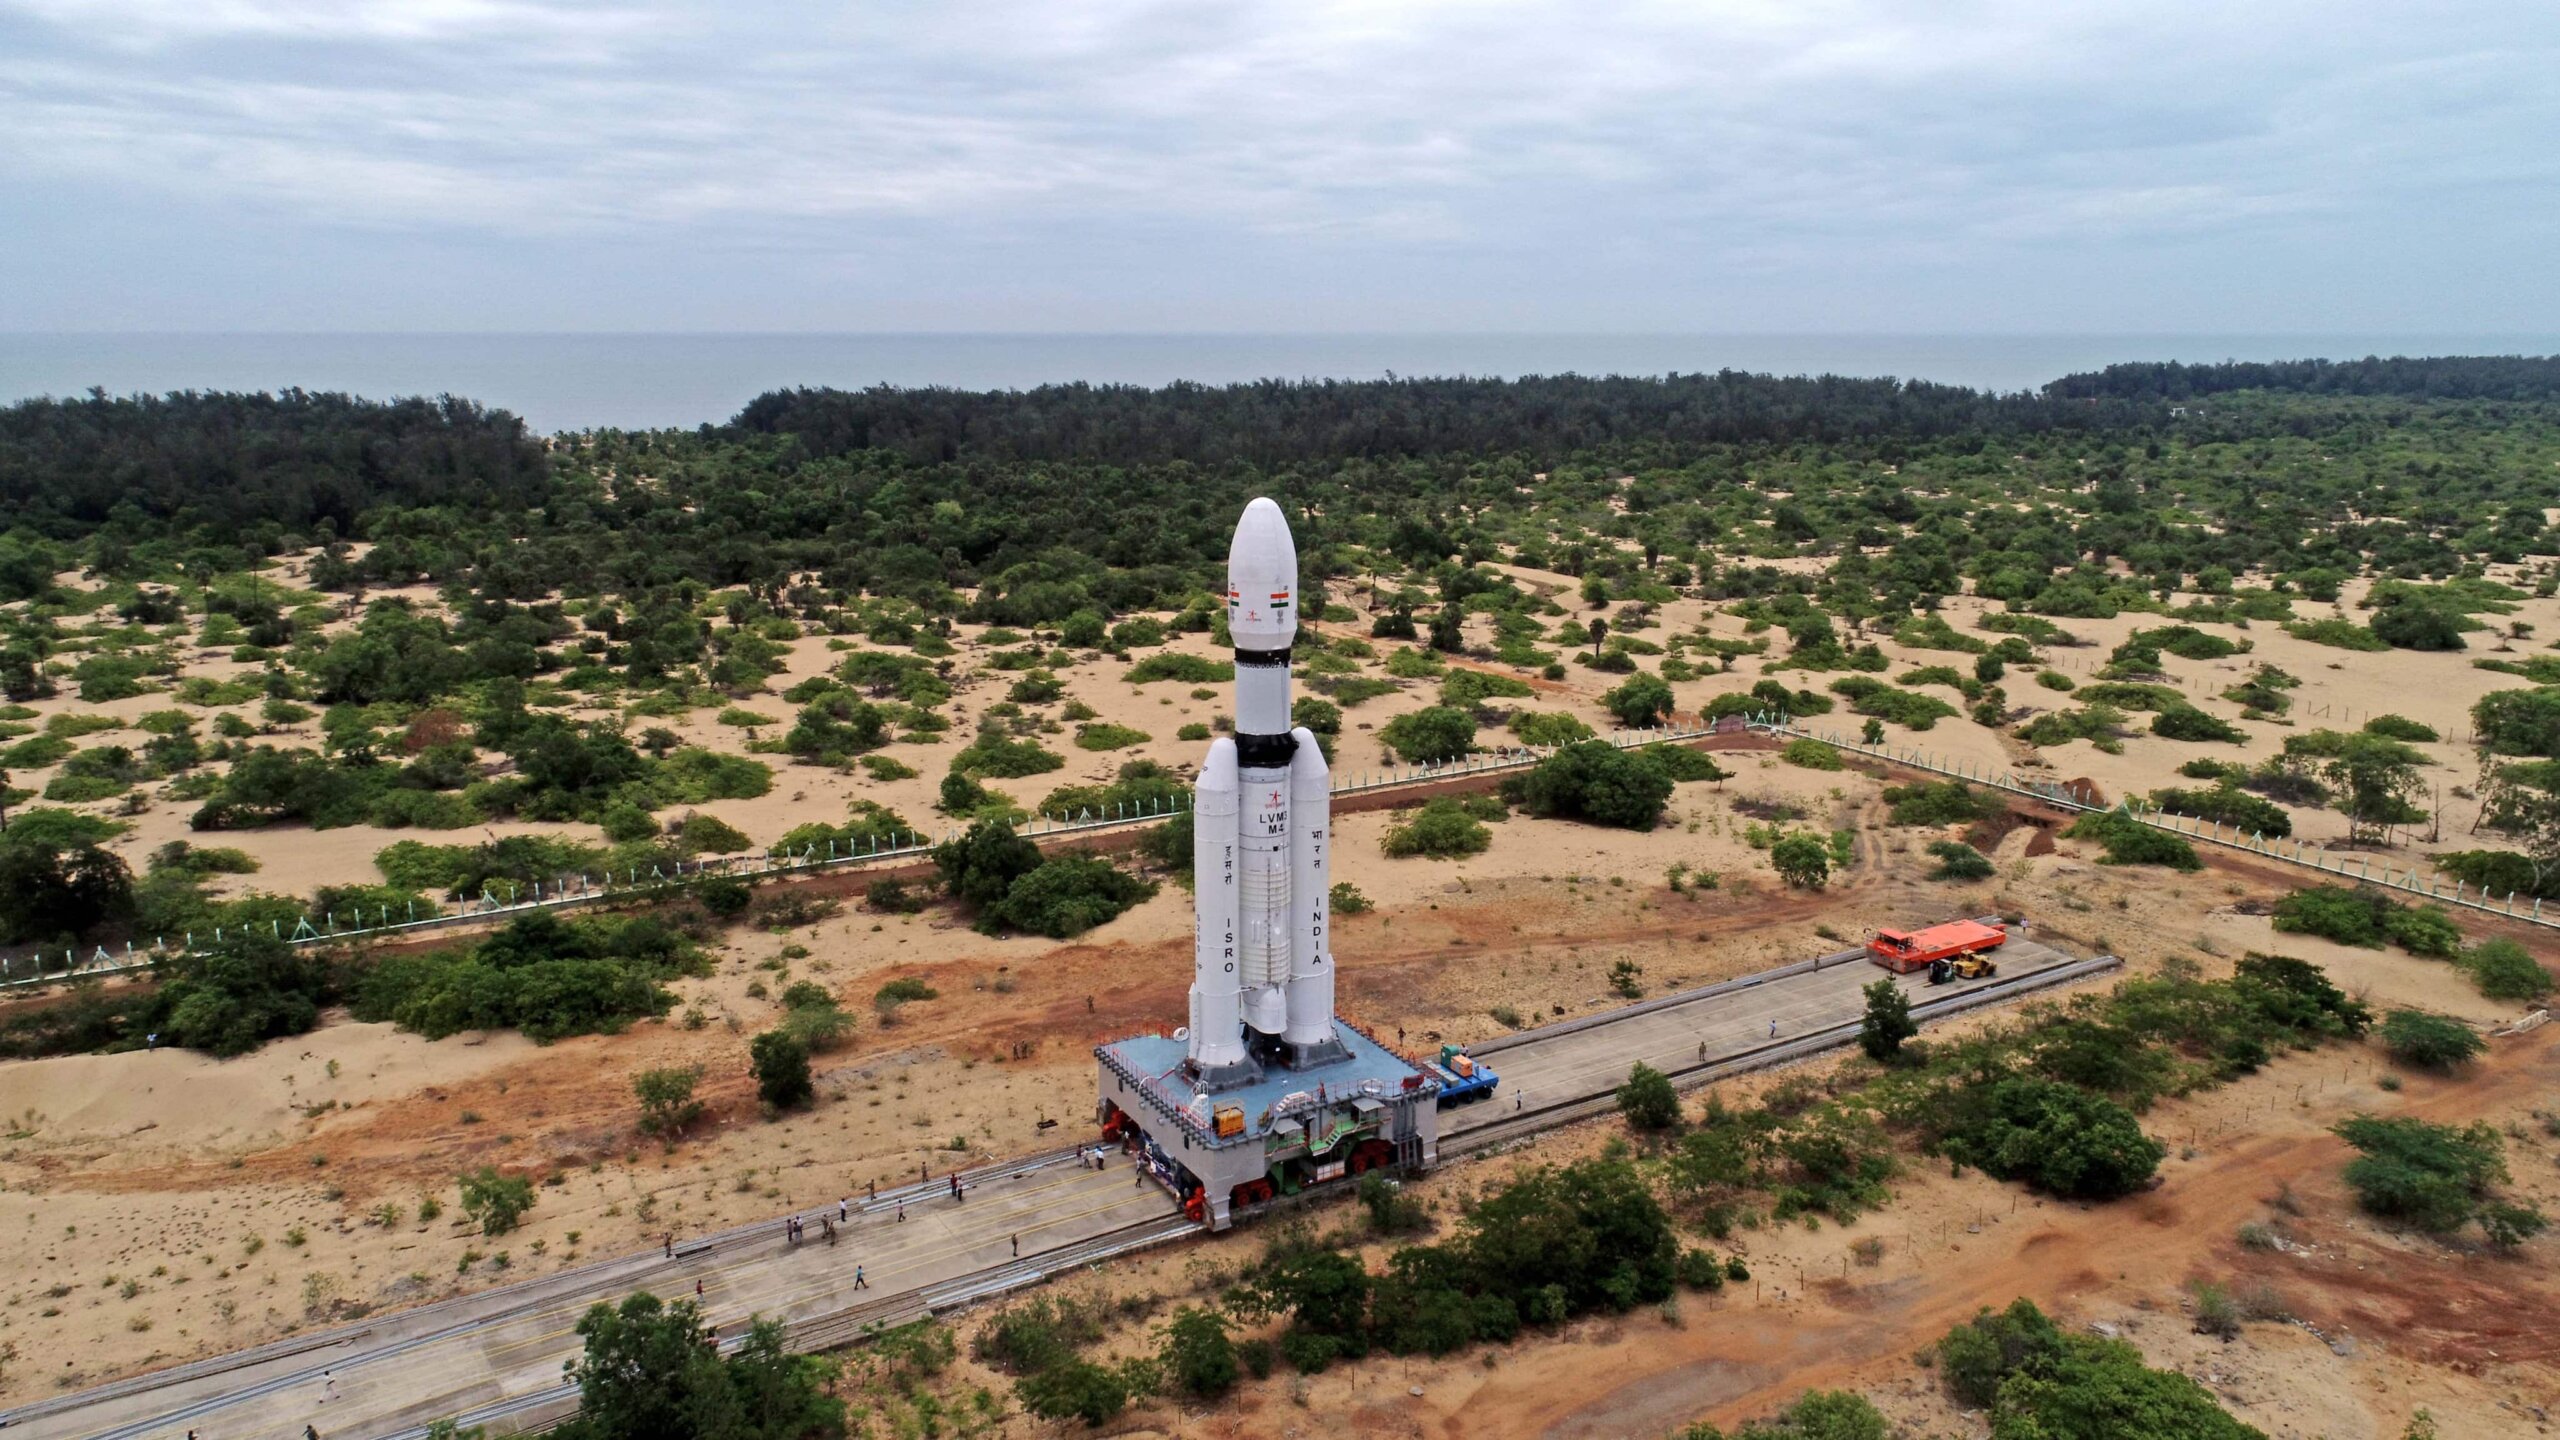 Chandrayaan-3 Commence Updates: India’s lunar mission efficiently launched, test expected landing time & date